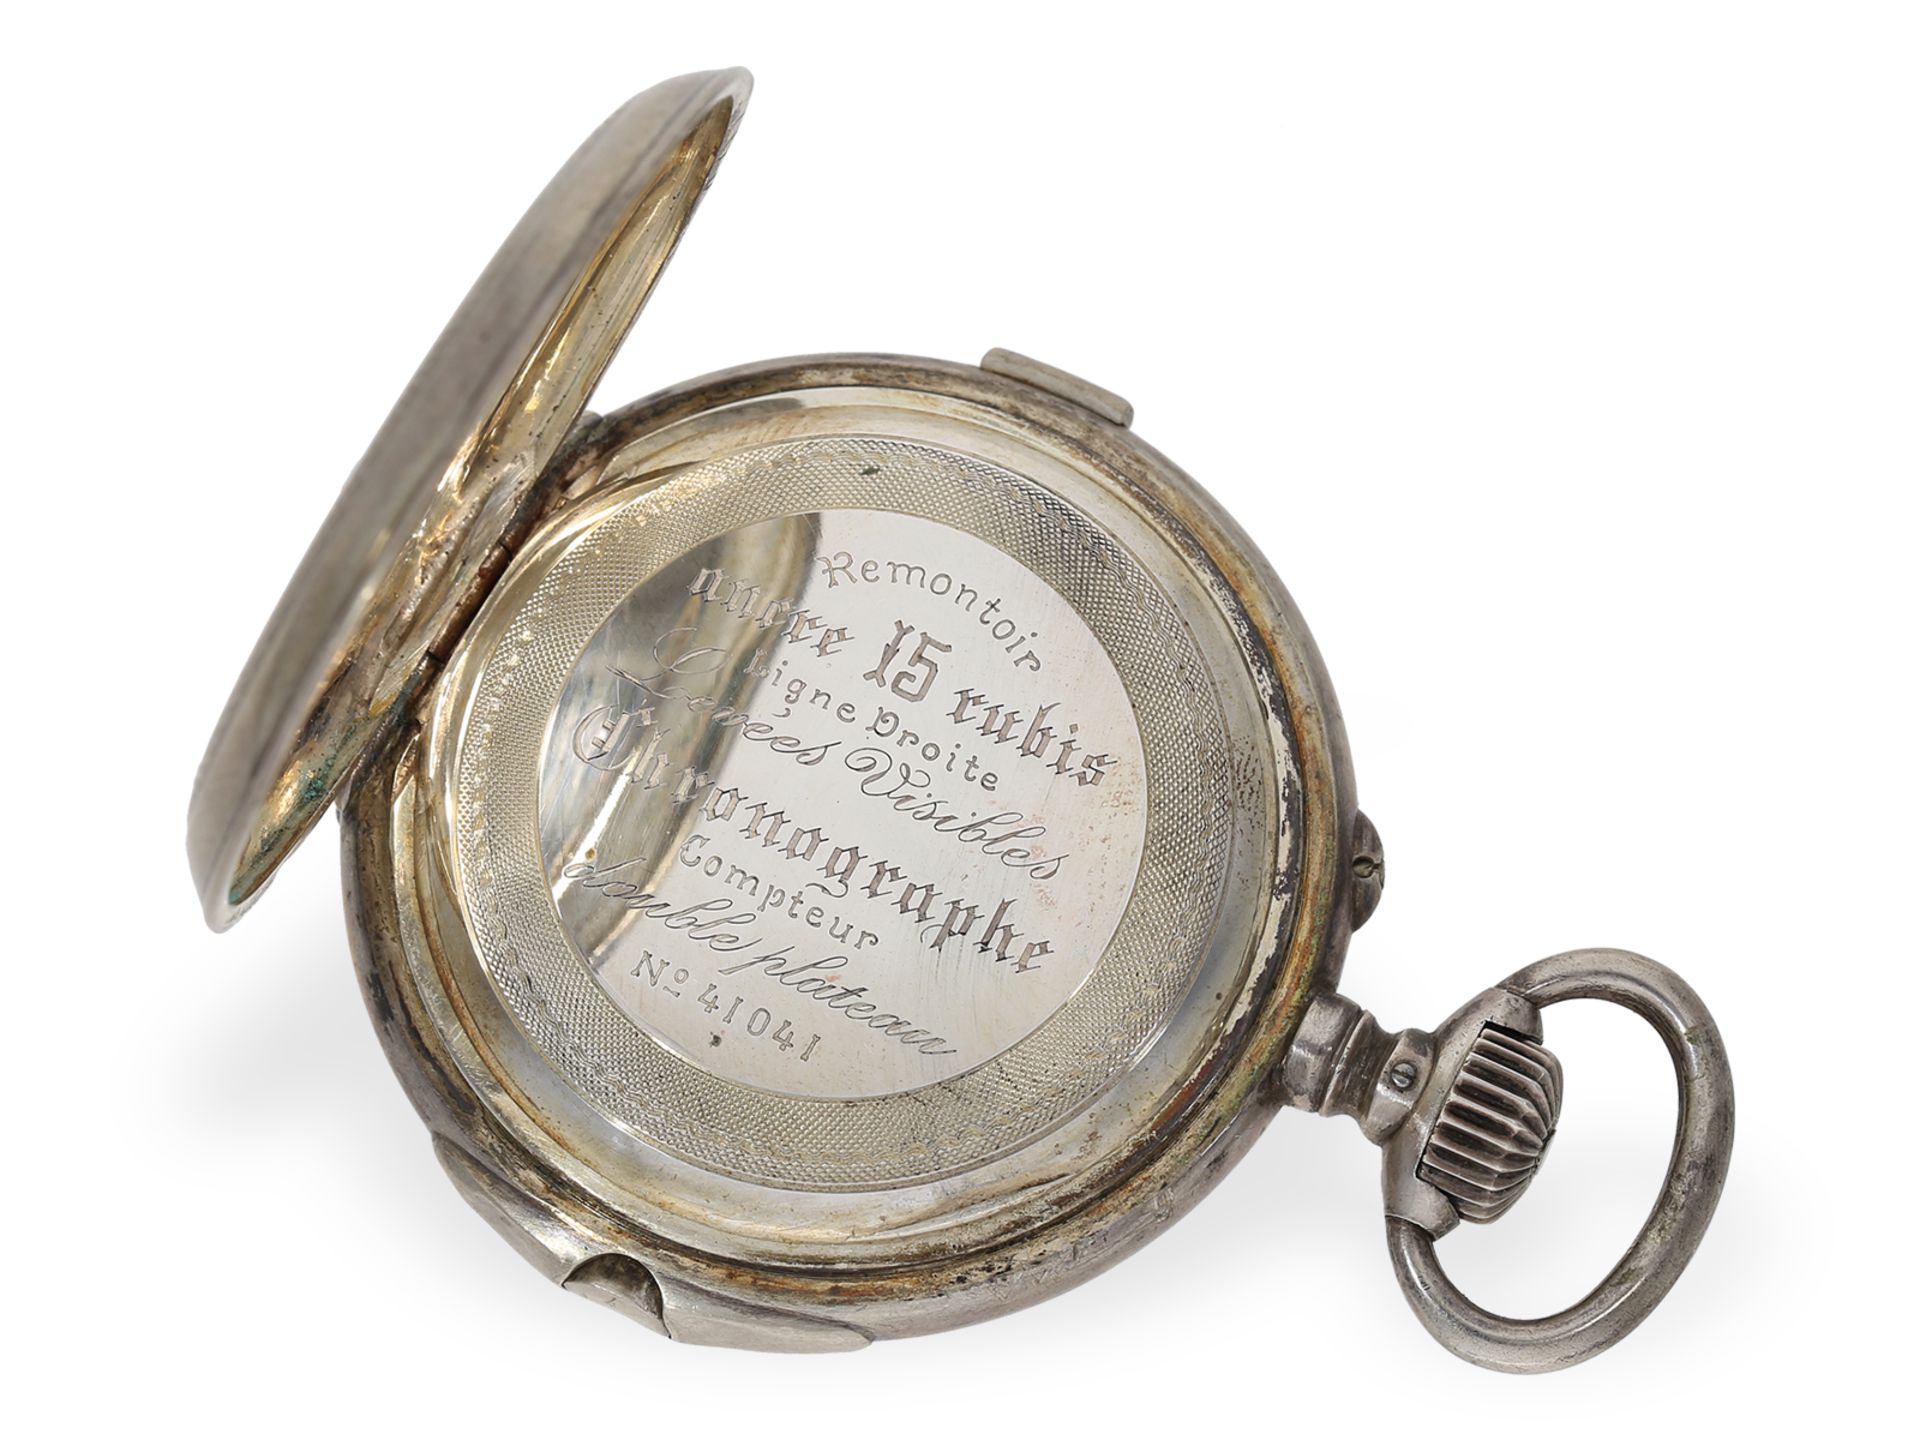 Pocket watch: technically interesting split-seconds chronograph, Bovet "Montre Universelle" ca. 1890 - Image 3 of 7